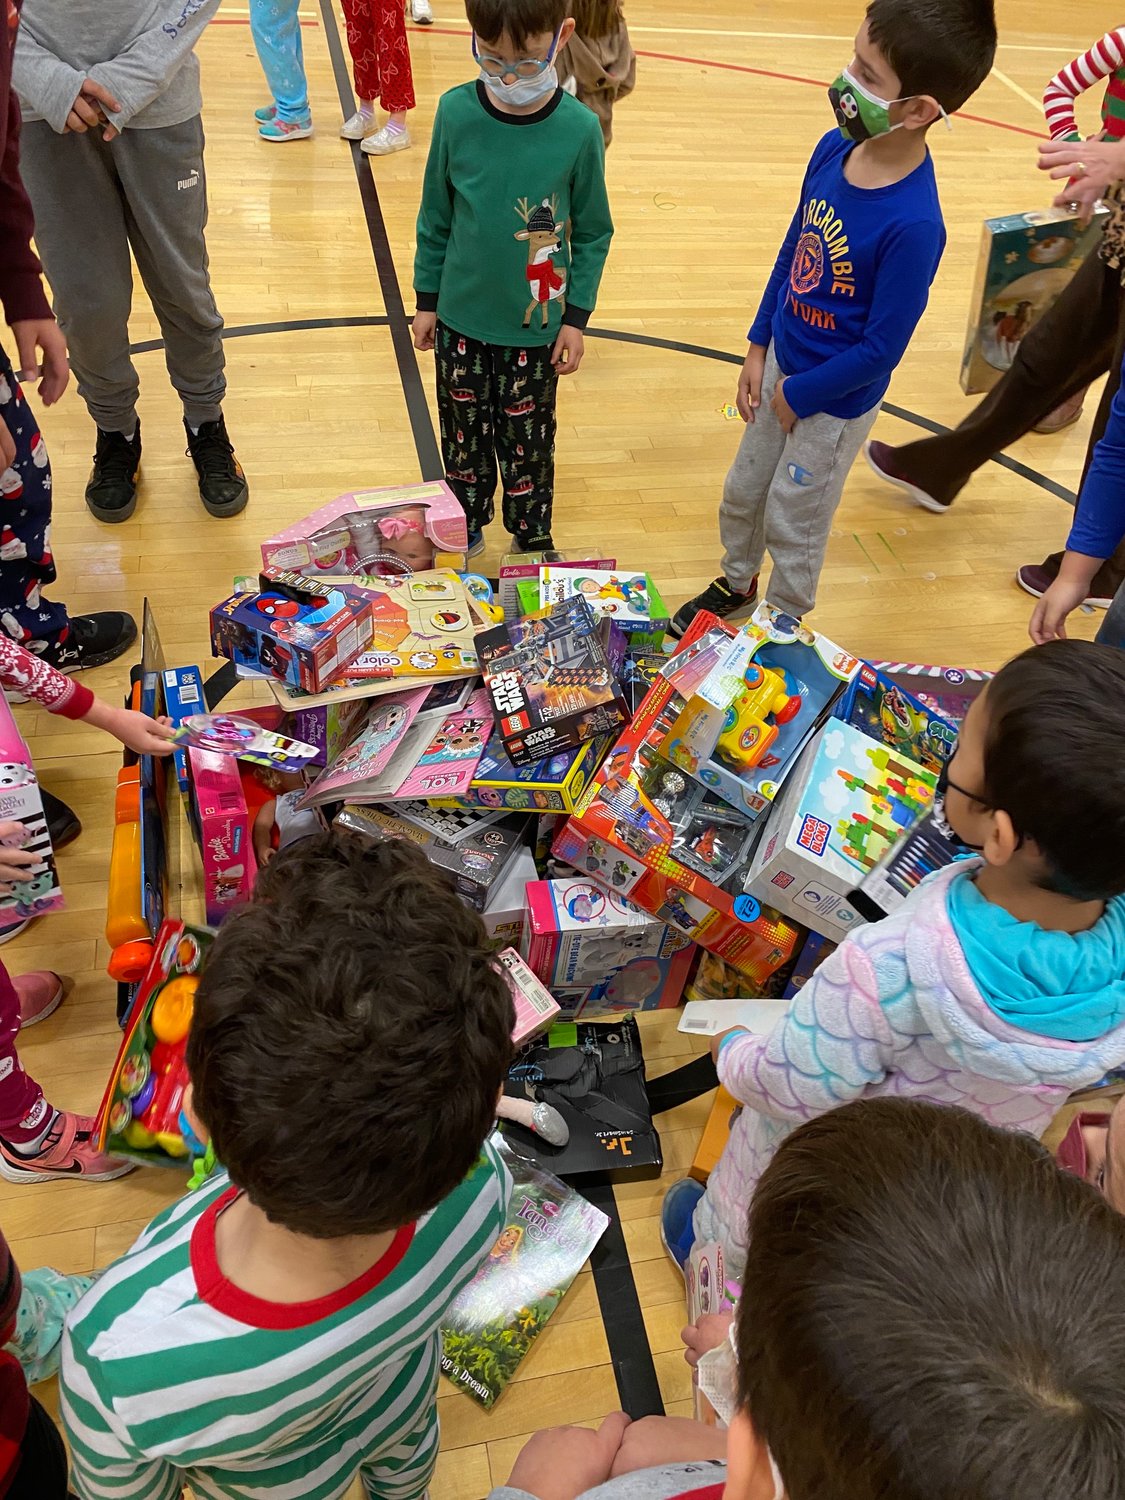 John Lewis Childs School held its annual “toy mountain” drive on Dec. 17.